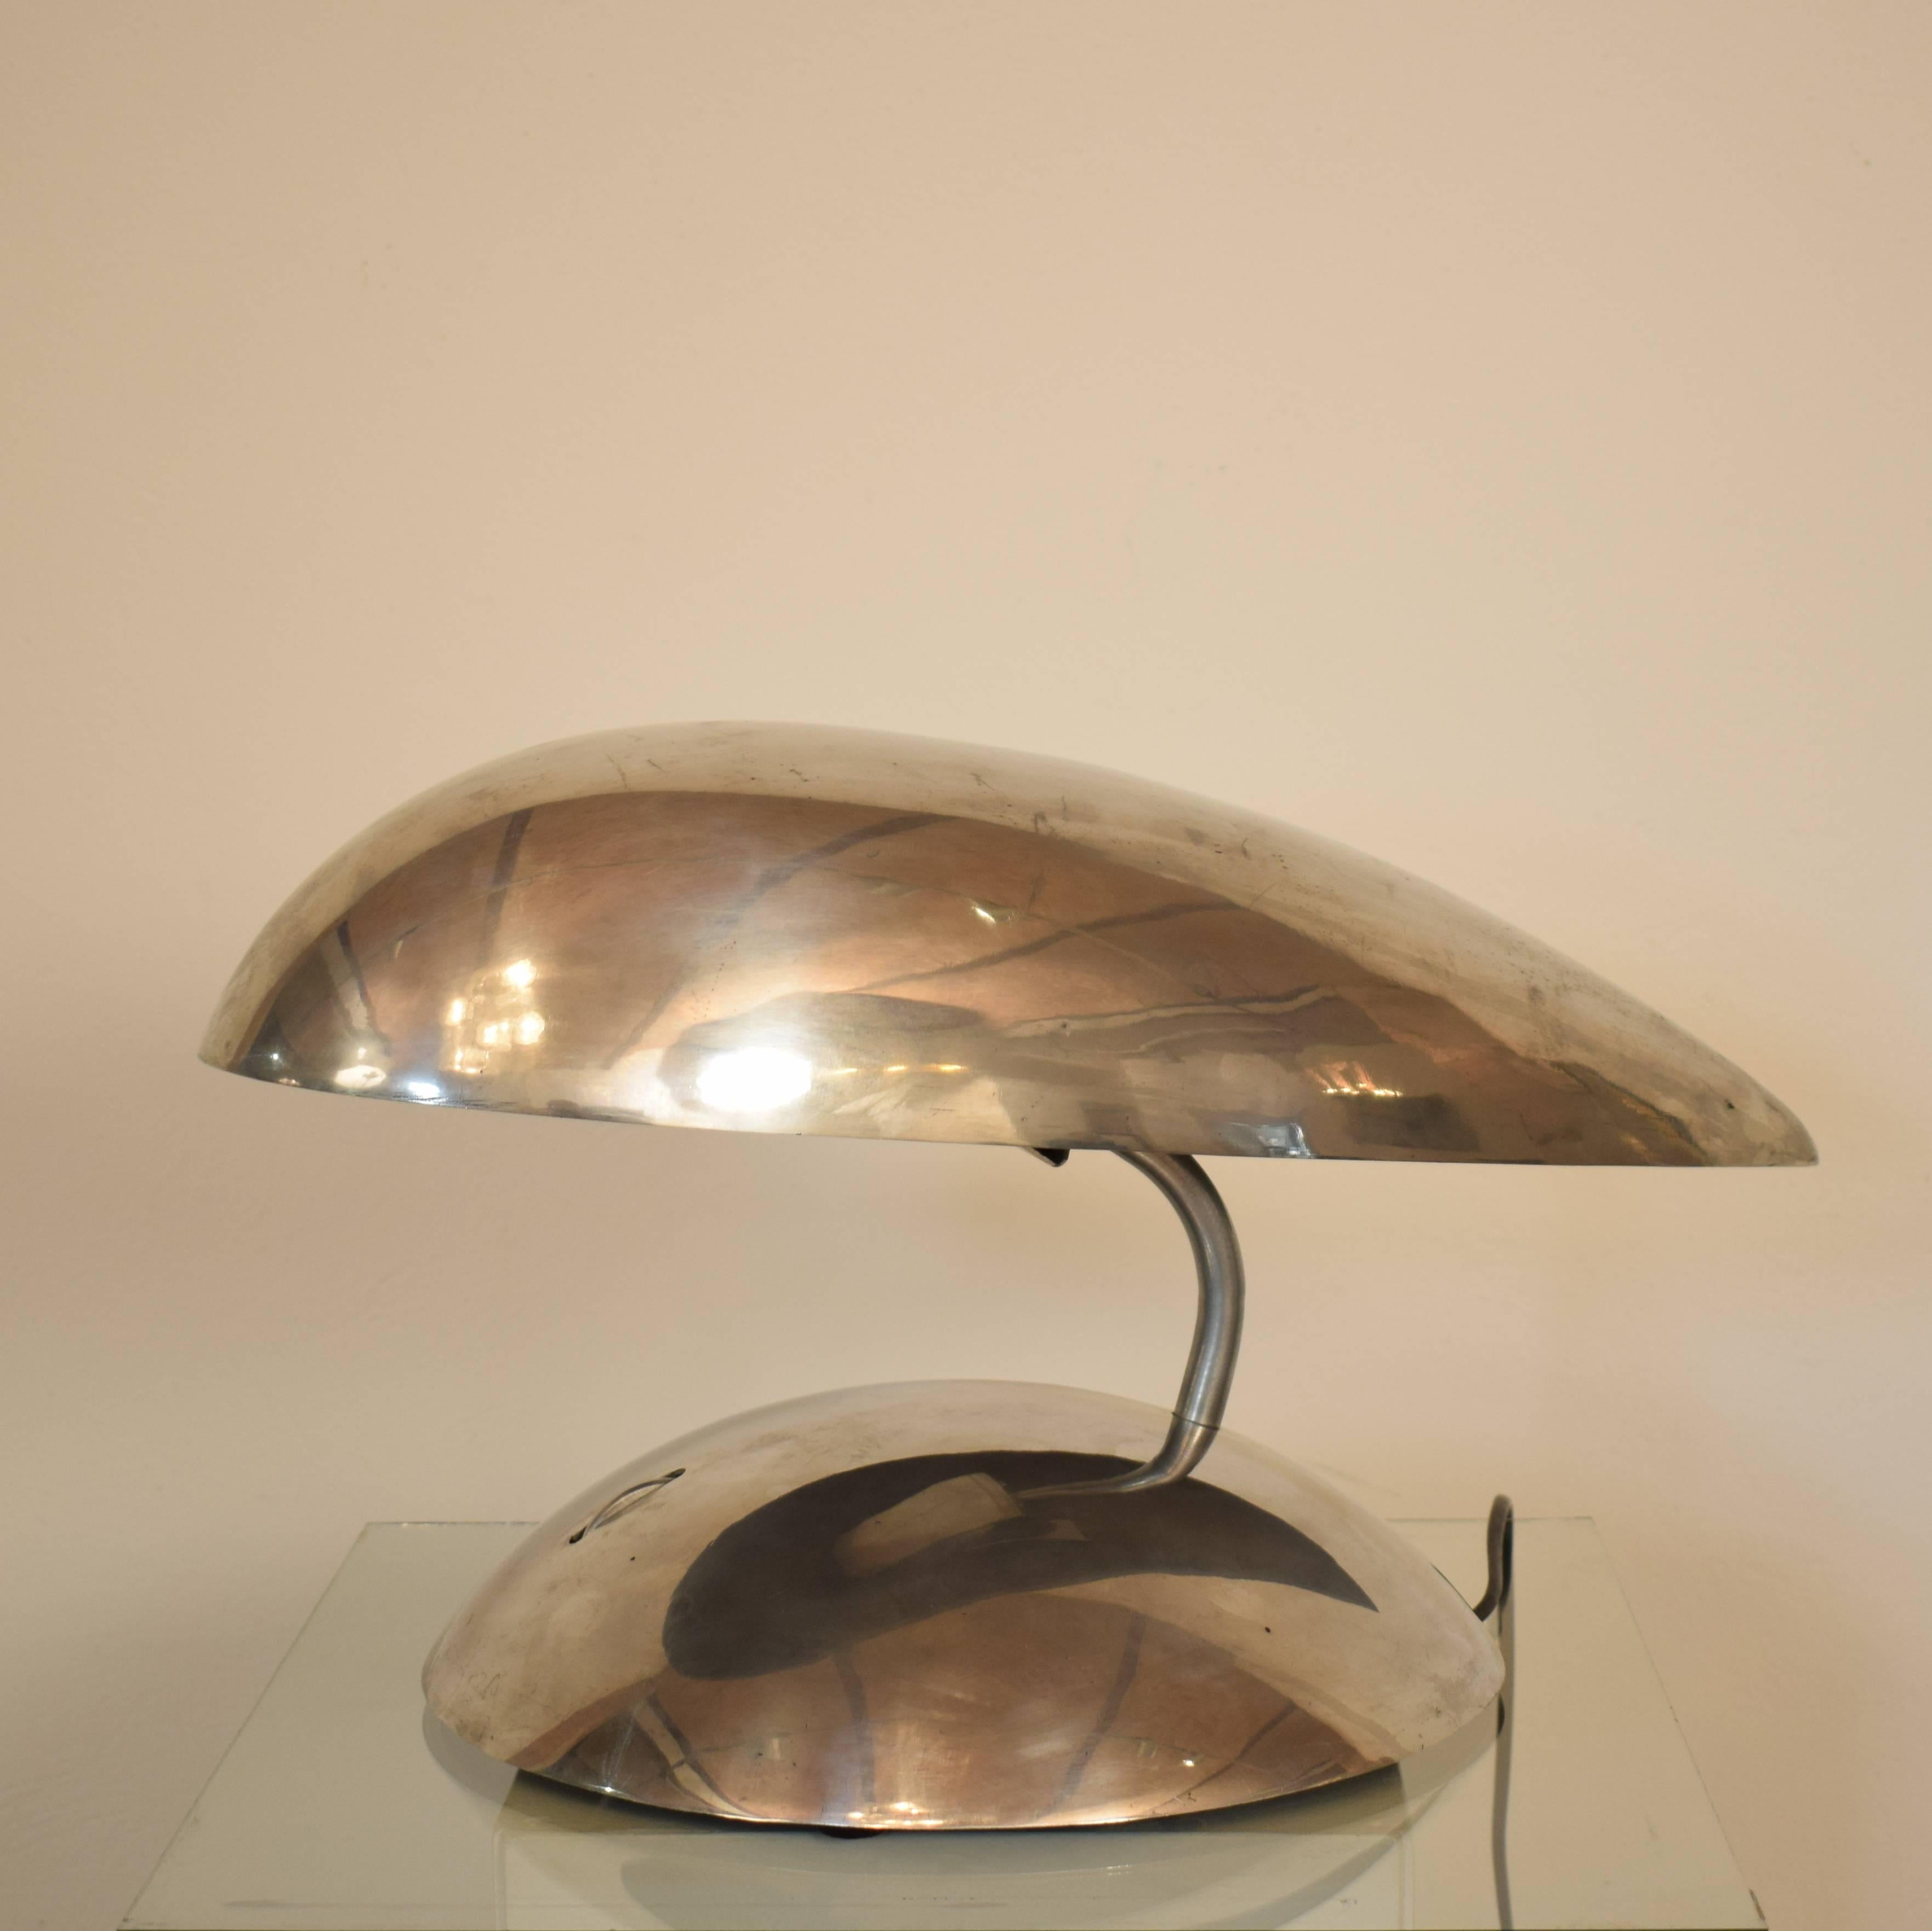 Late 20th Century Polished Aluminium Space Age Table Lamp from the 1980s